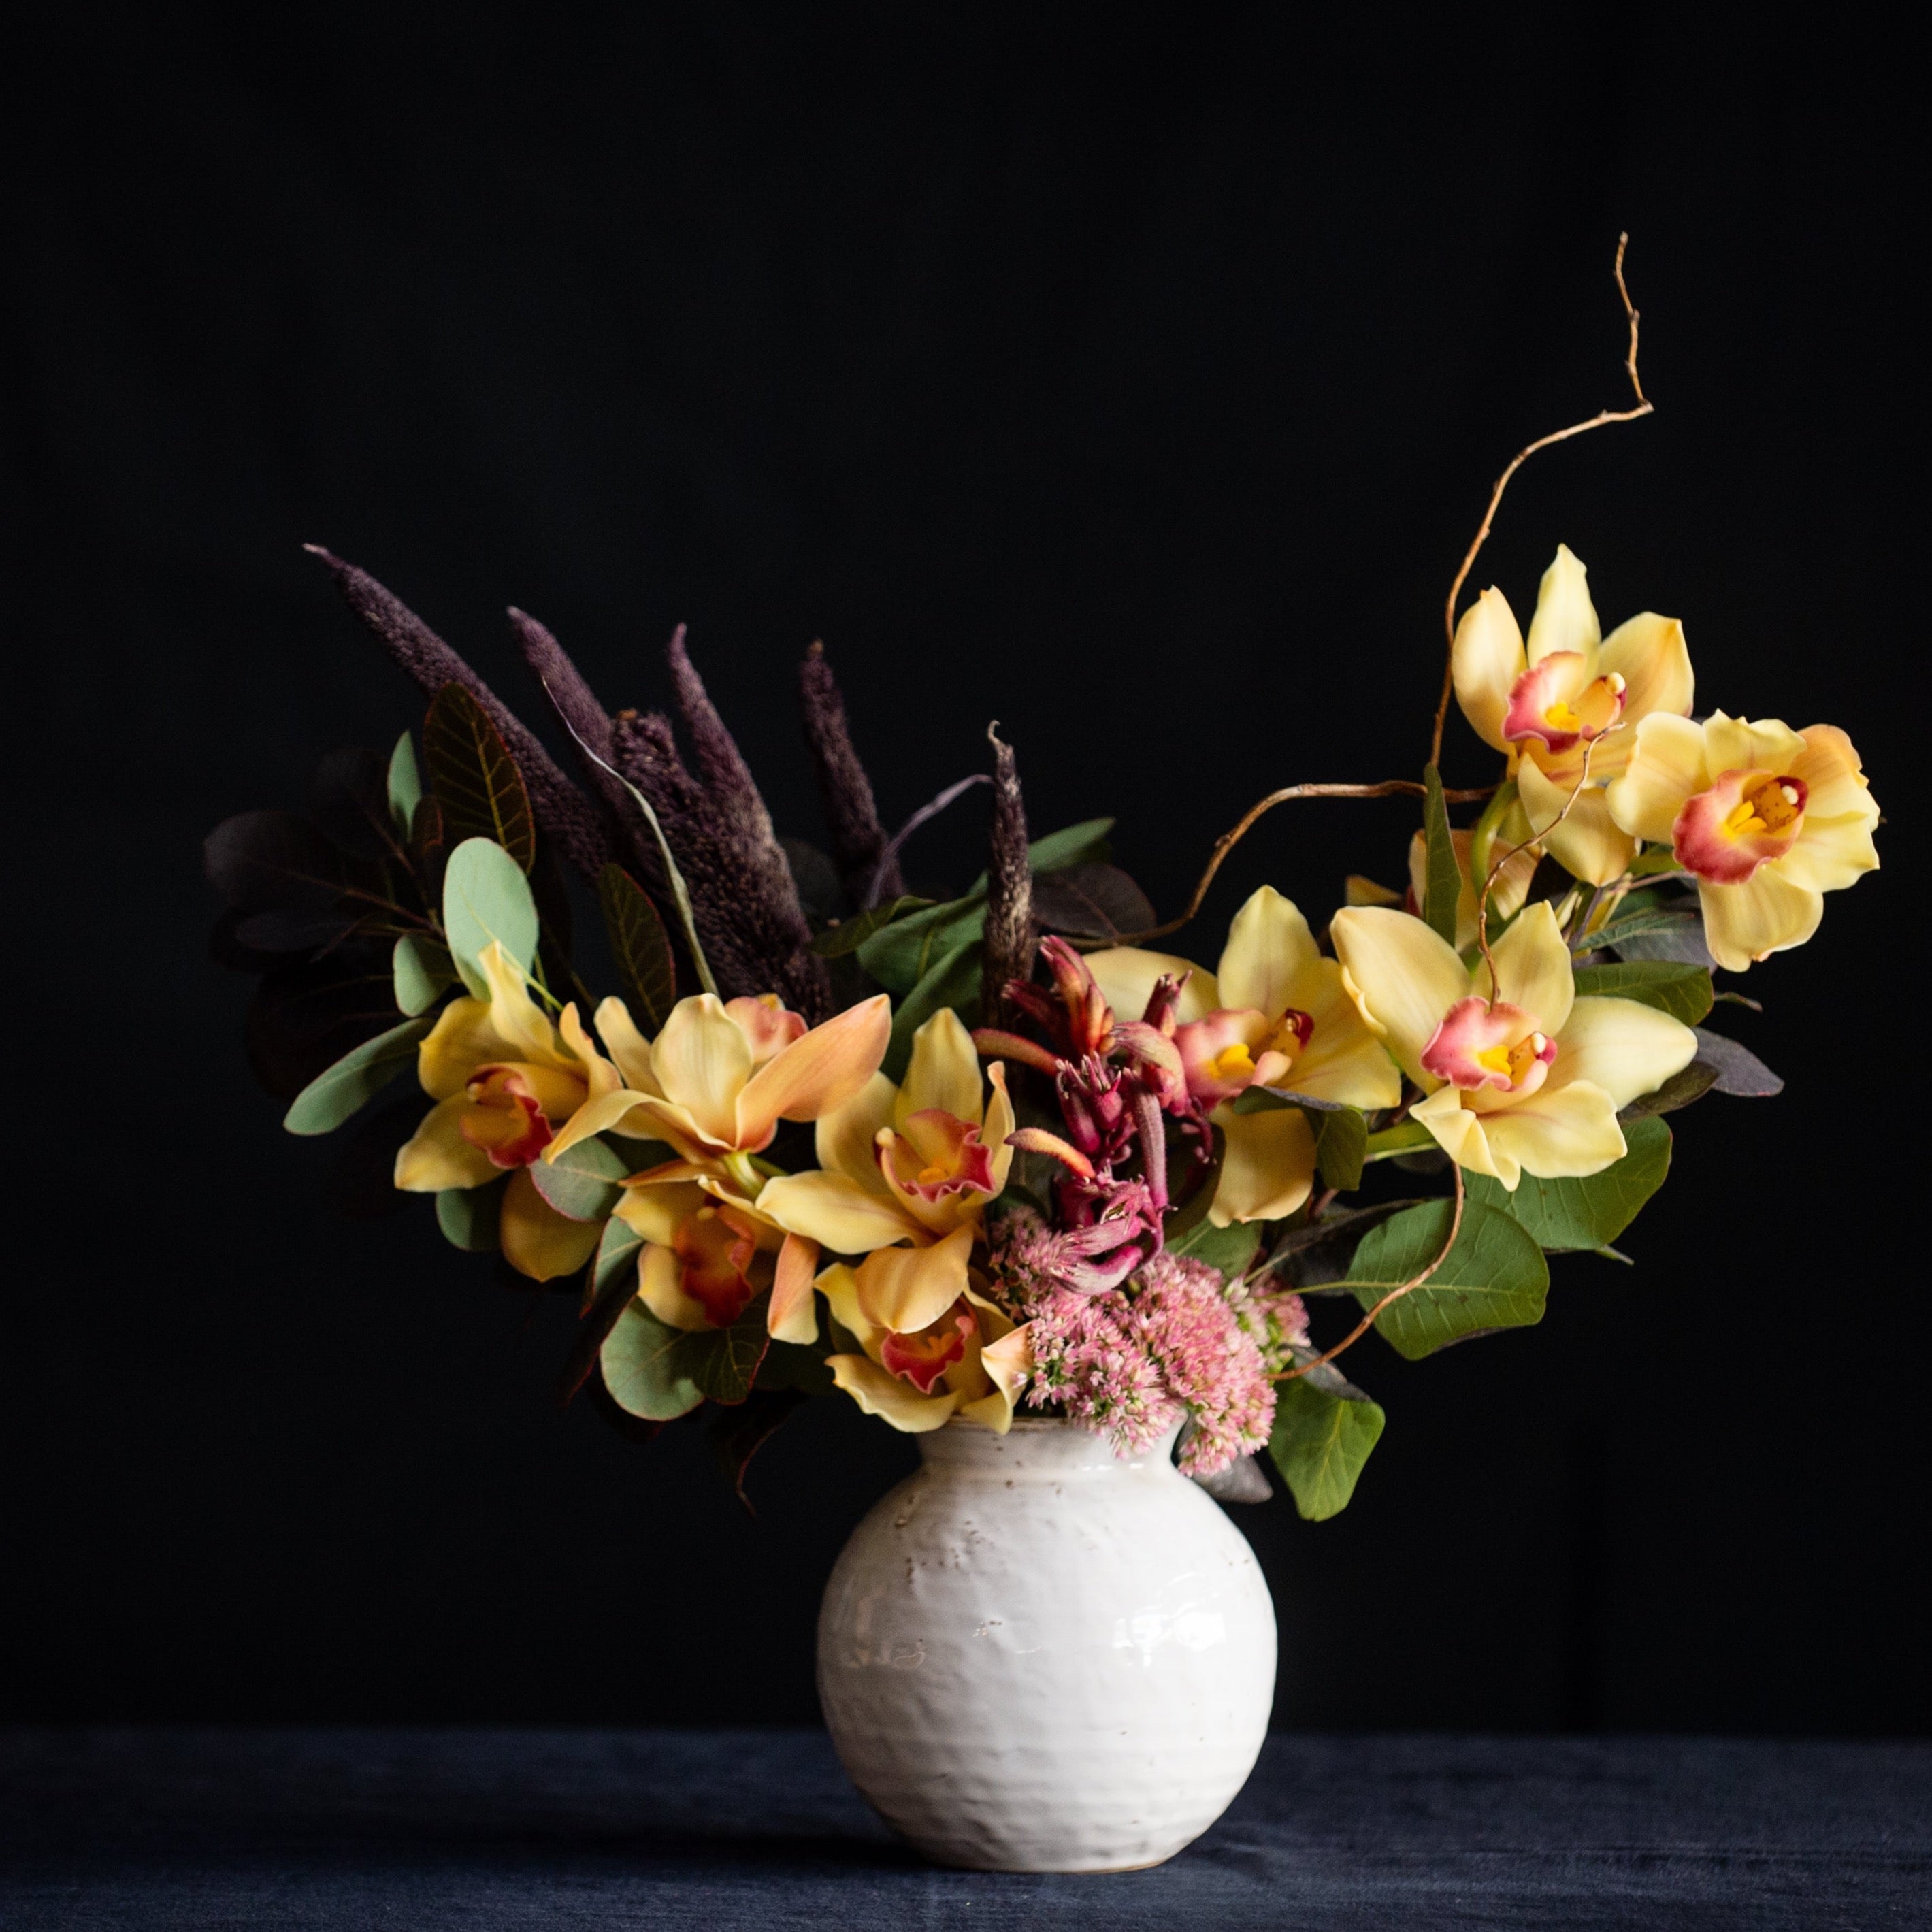 Oversized cymbidium orchid blooms, Autumn leaves, and seasonal accents make this design a great Fall go-to